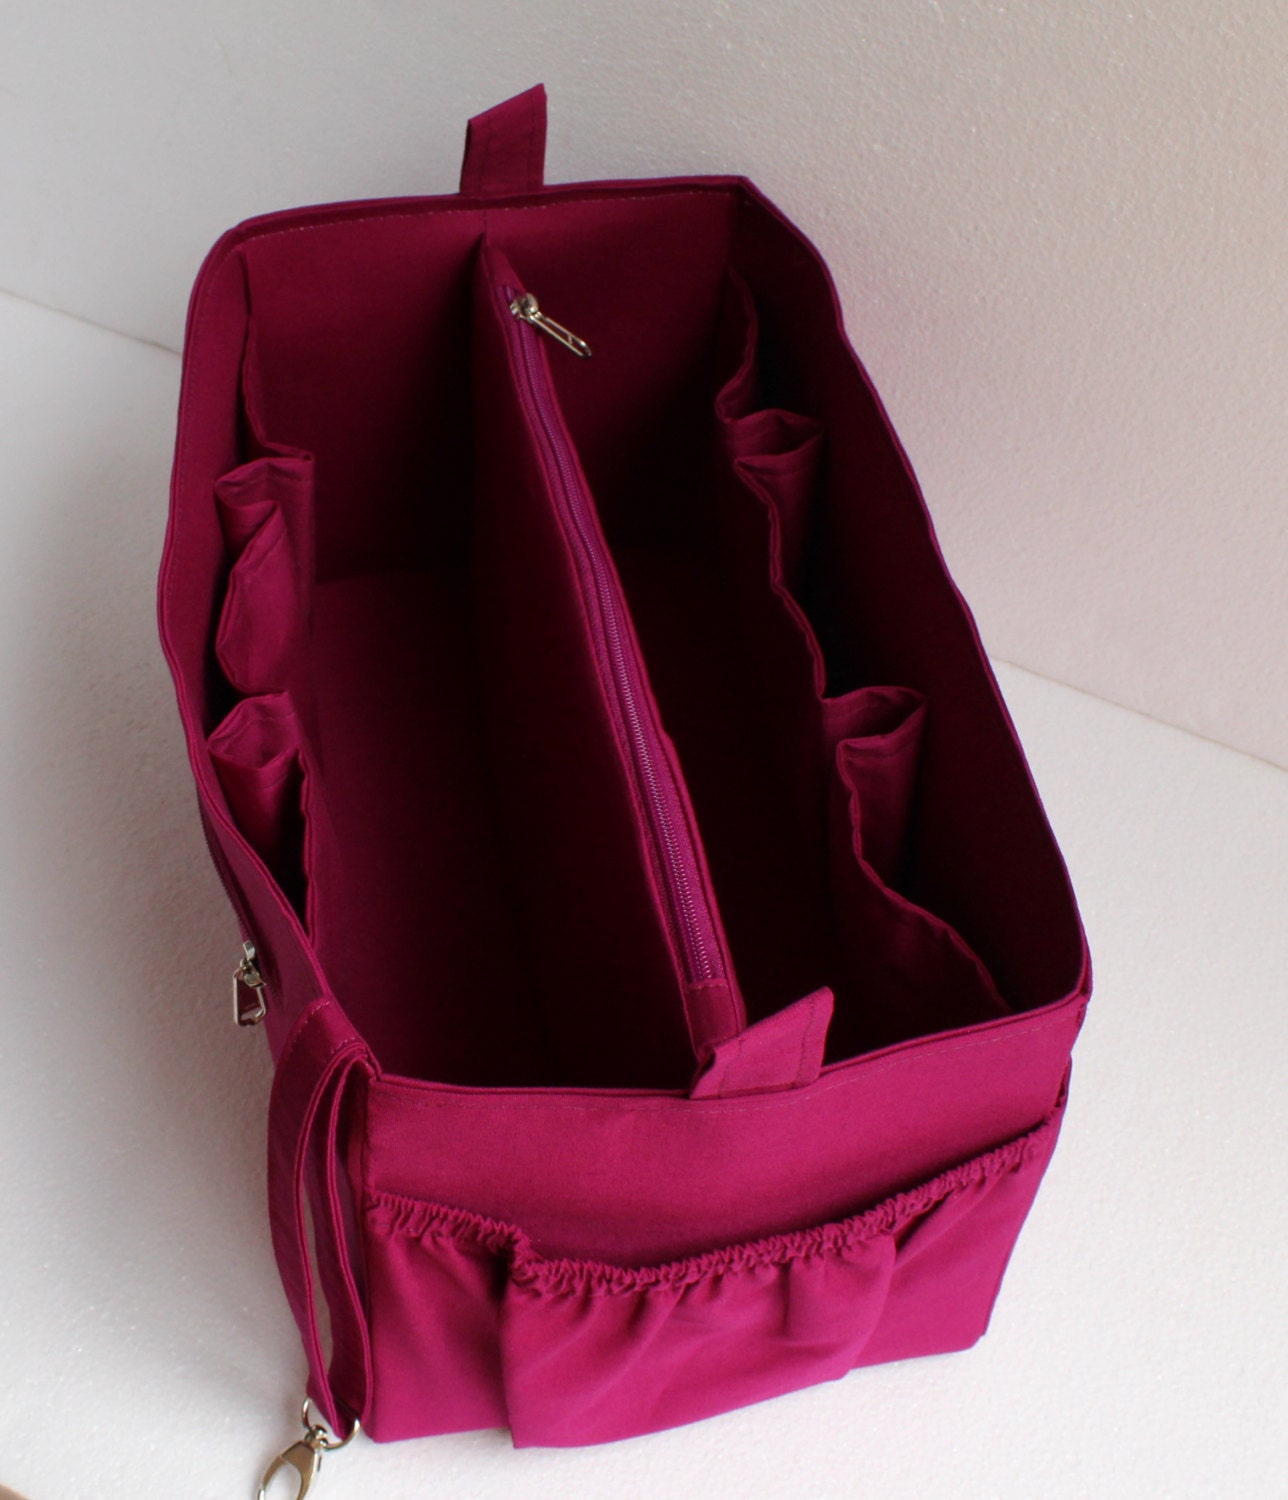 Extra Large Purse Organizer Bag Organizer Insert in Rich Red Fits